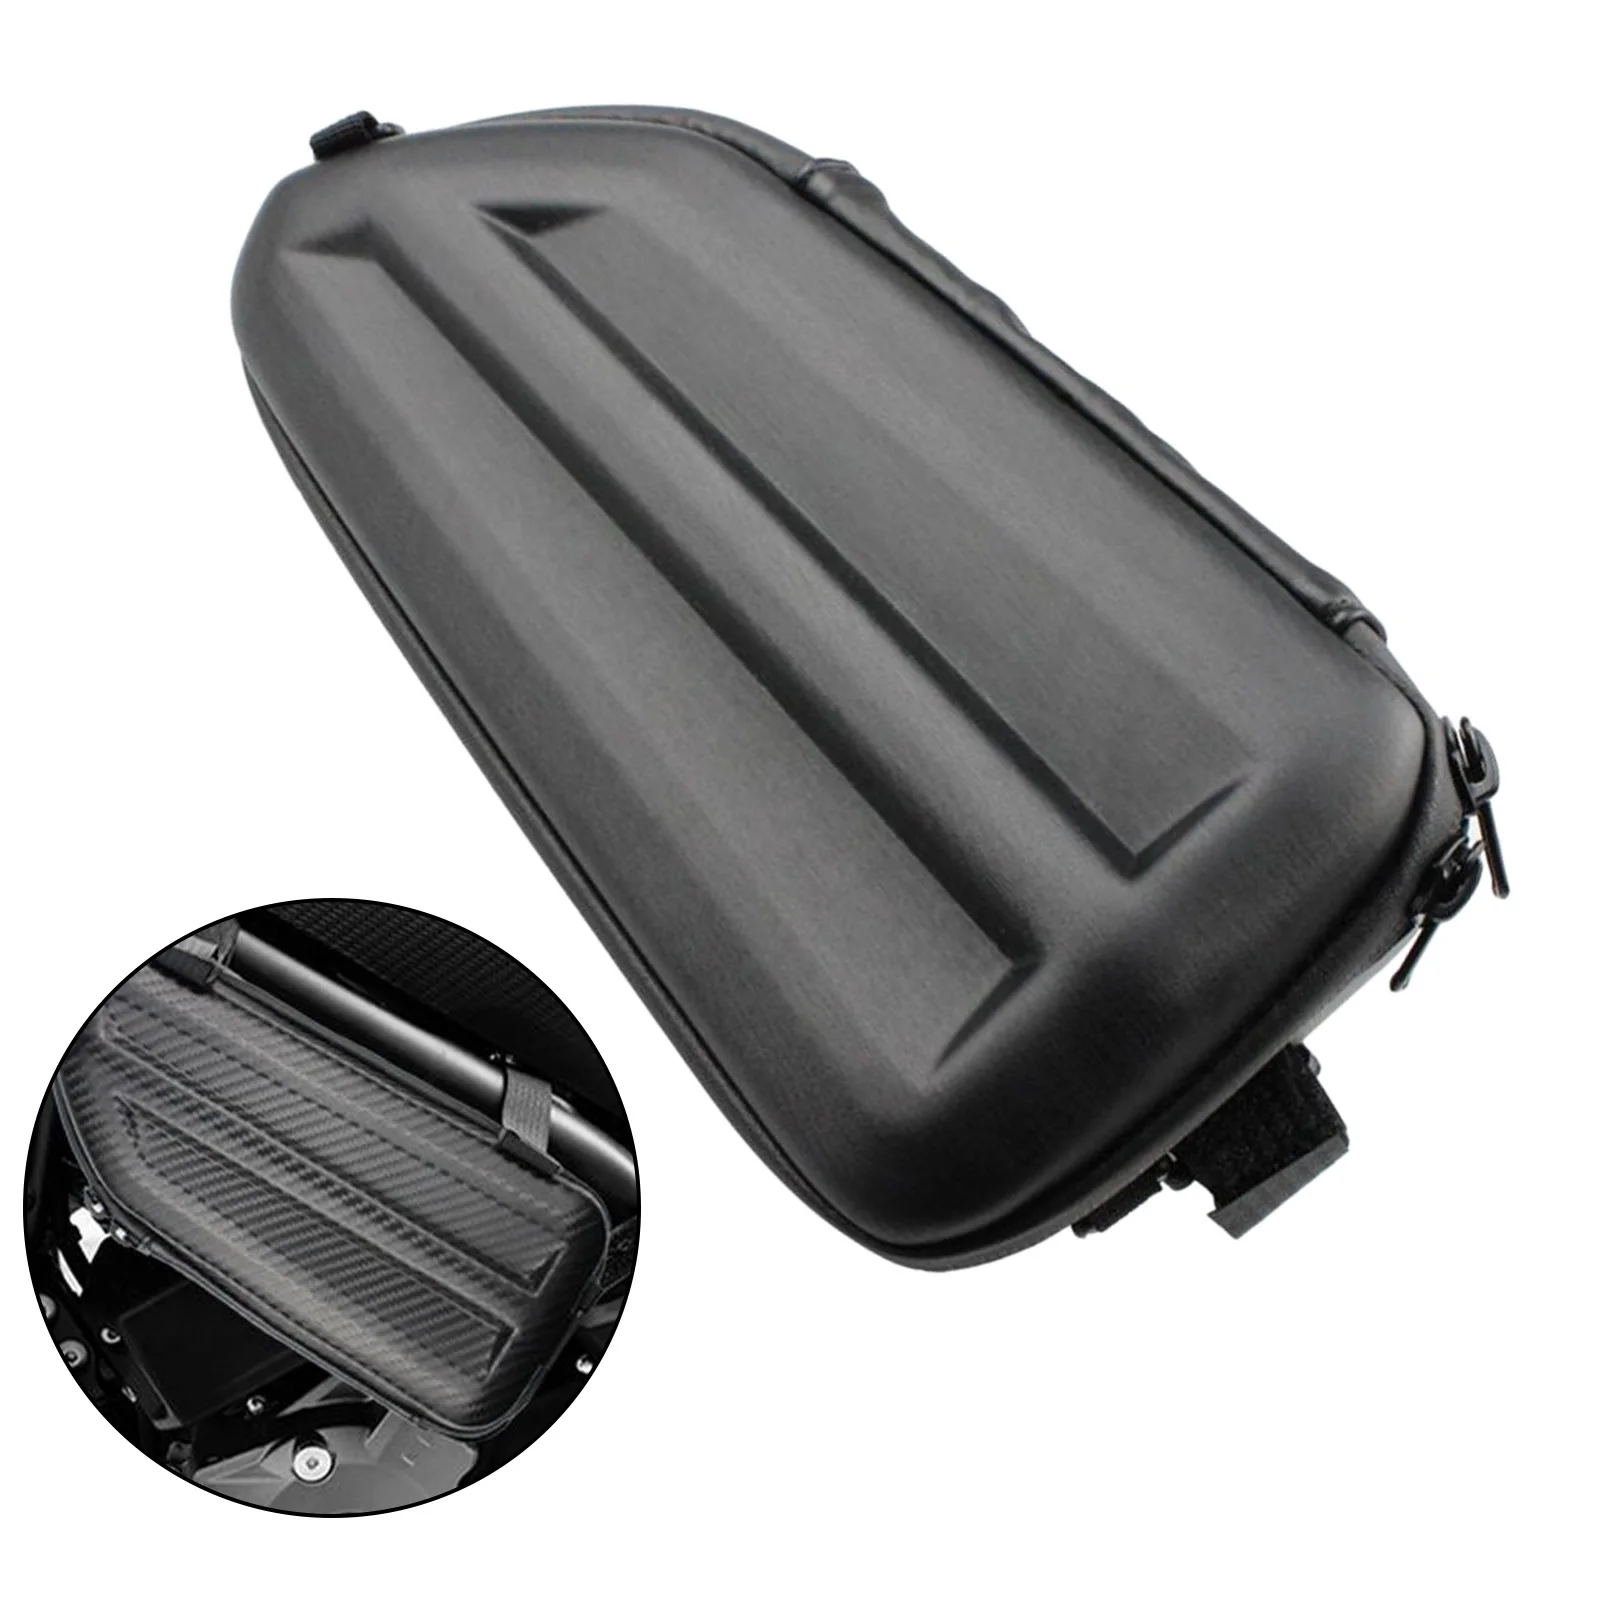 Bike  Bag, Triangle Bag Front Tube Water Resistant Waterproof Cycling  Pouch Storage Bag for Bike Pumps Repair Tools